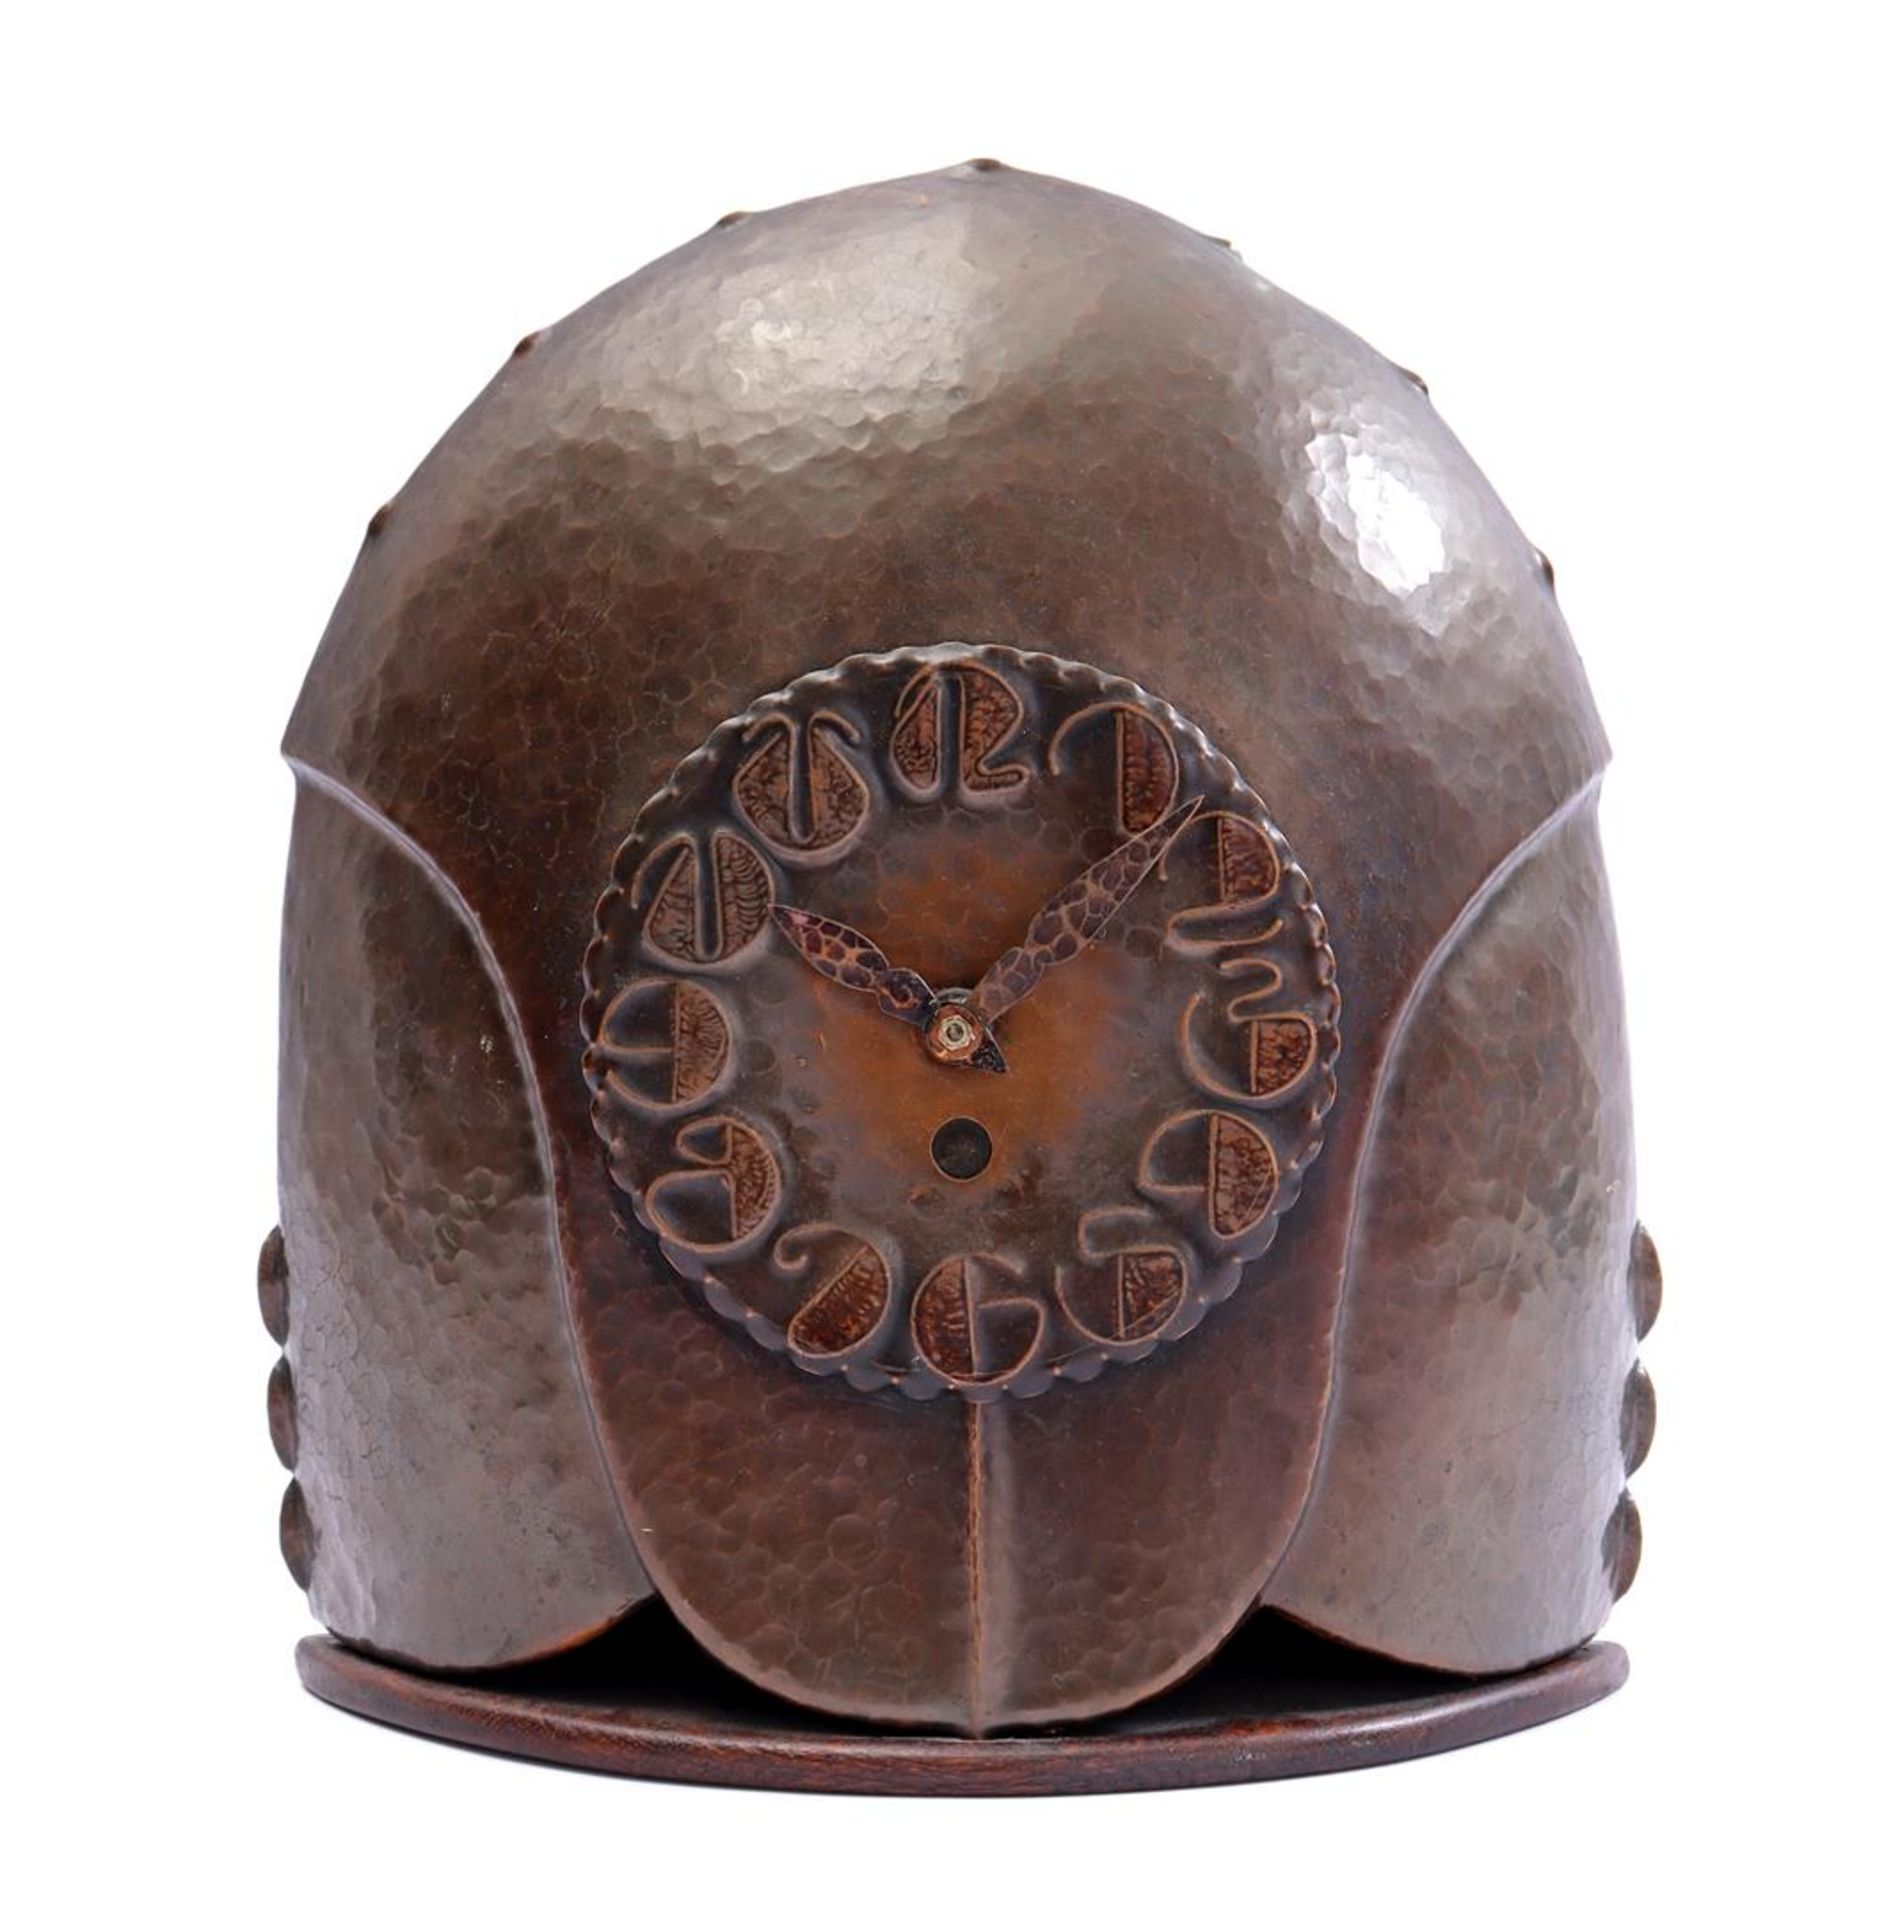 Hammered copper Amsterdam School table clock